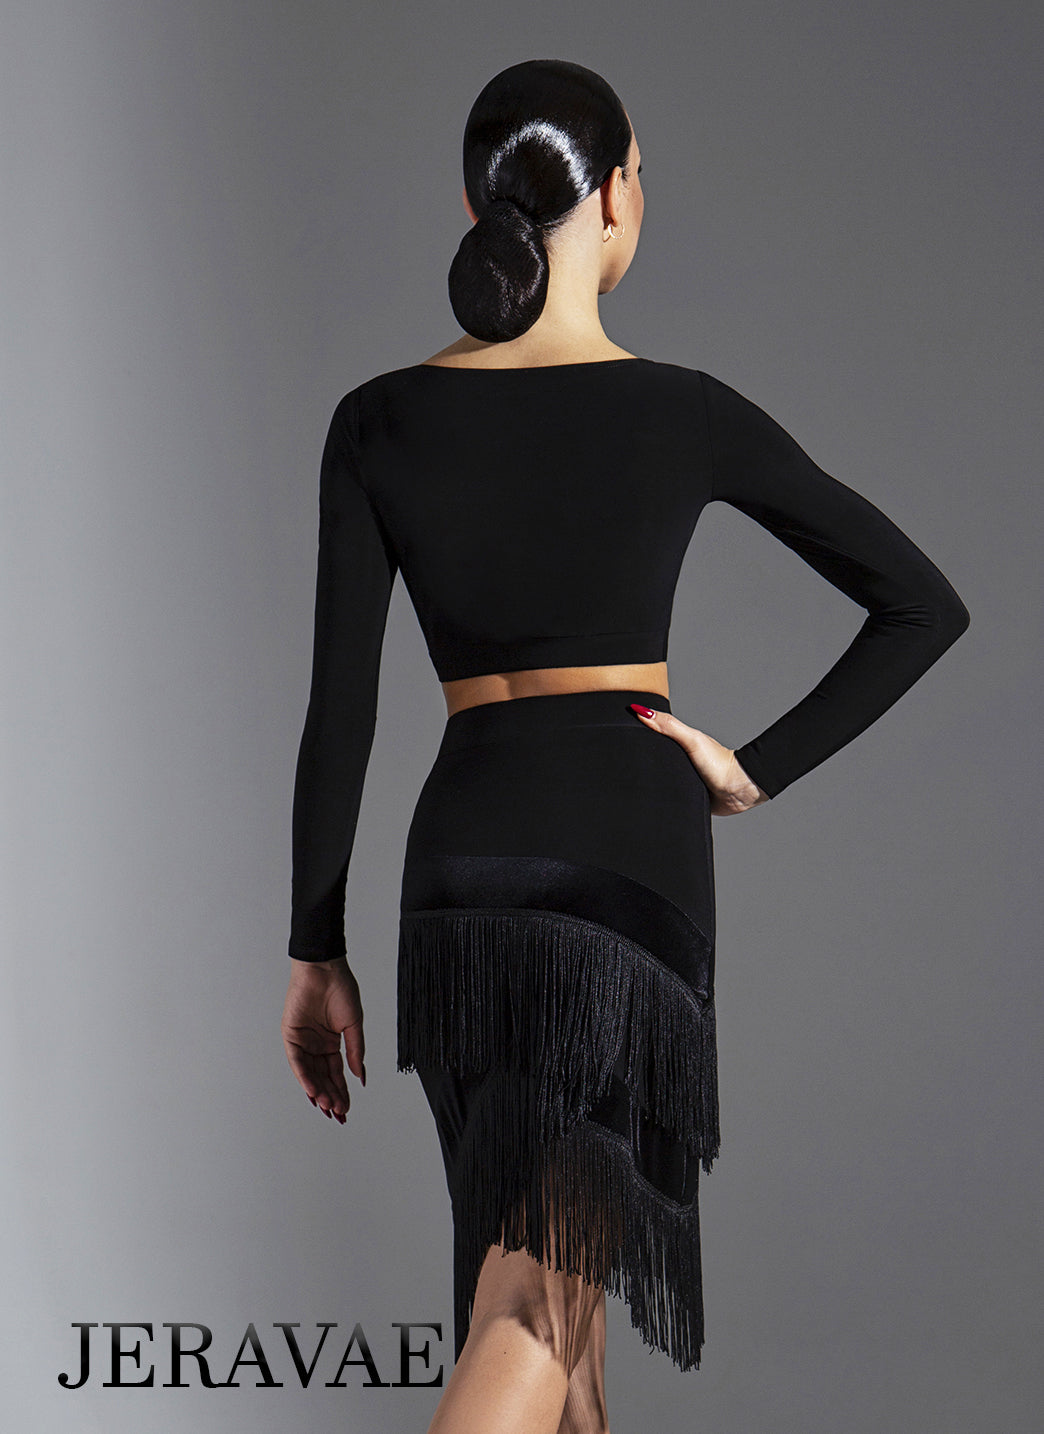 Diagonal Cut Fringe Practice Skirt with Velvet Accents and Cross Pattern Cut with Trunks PRA 632